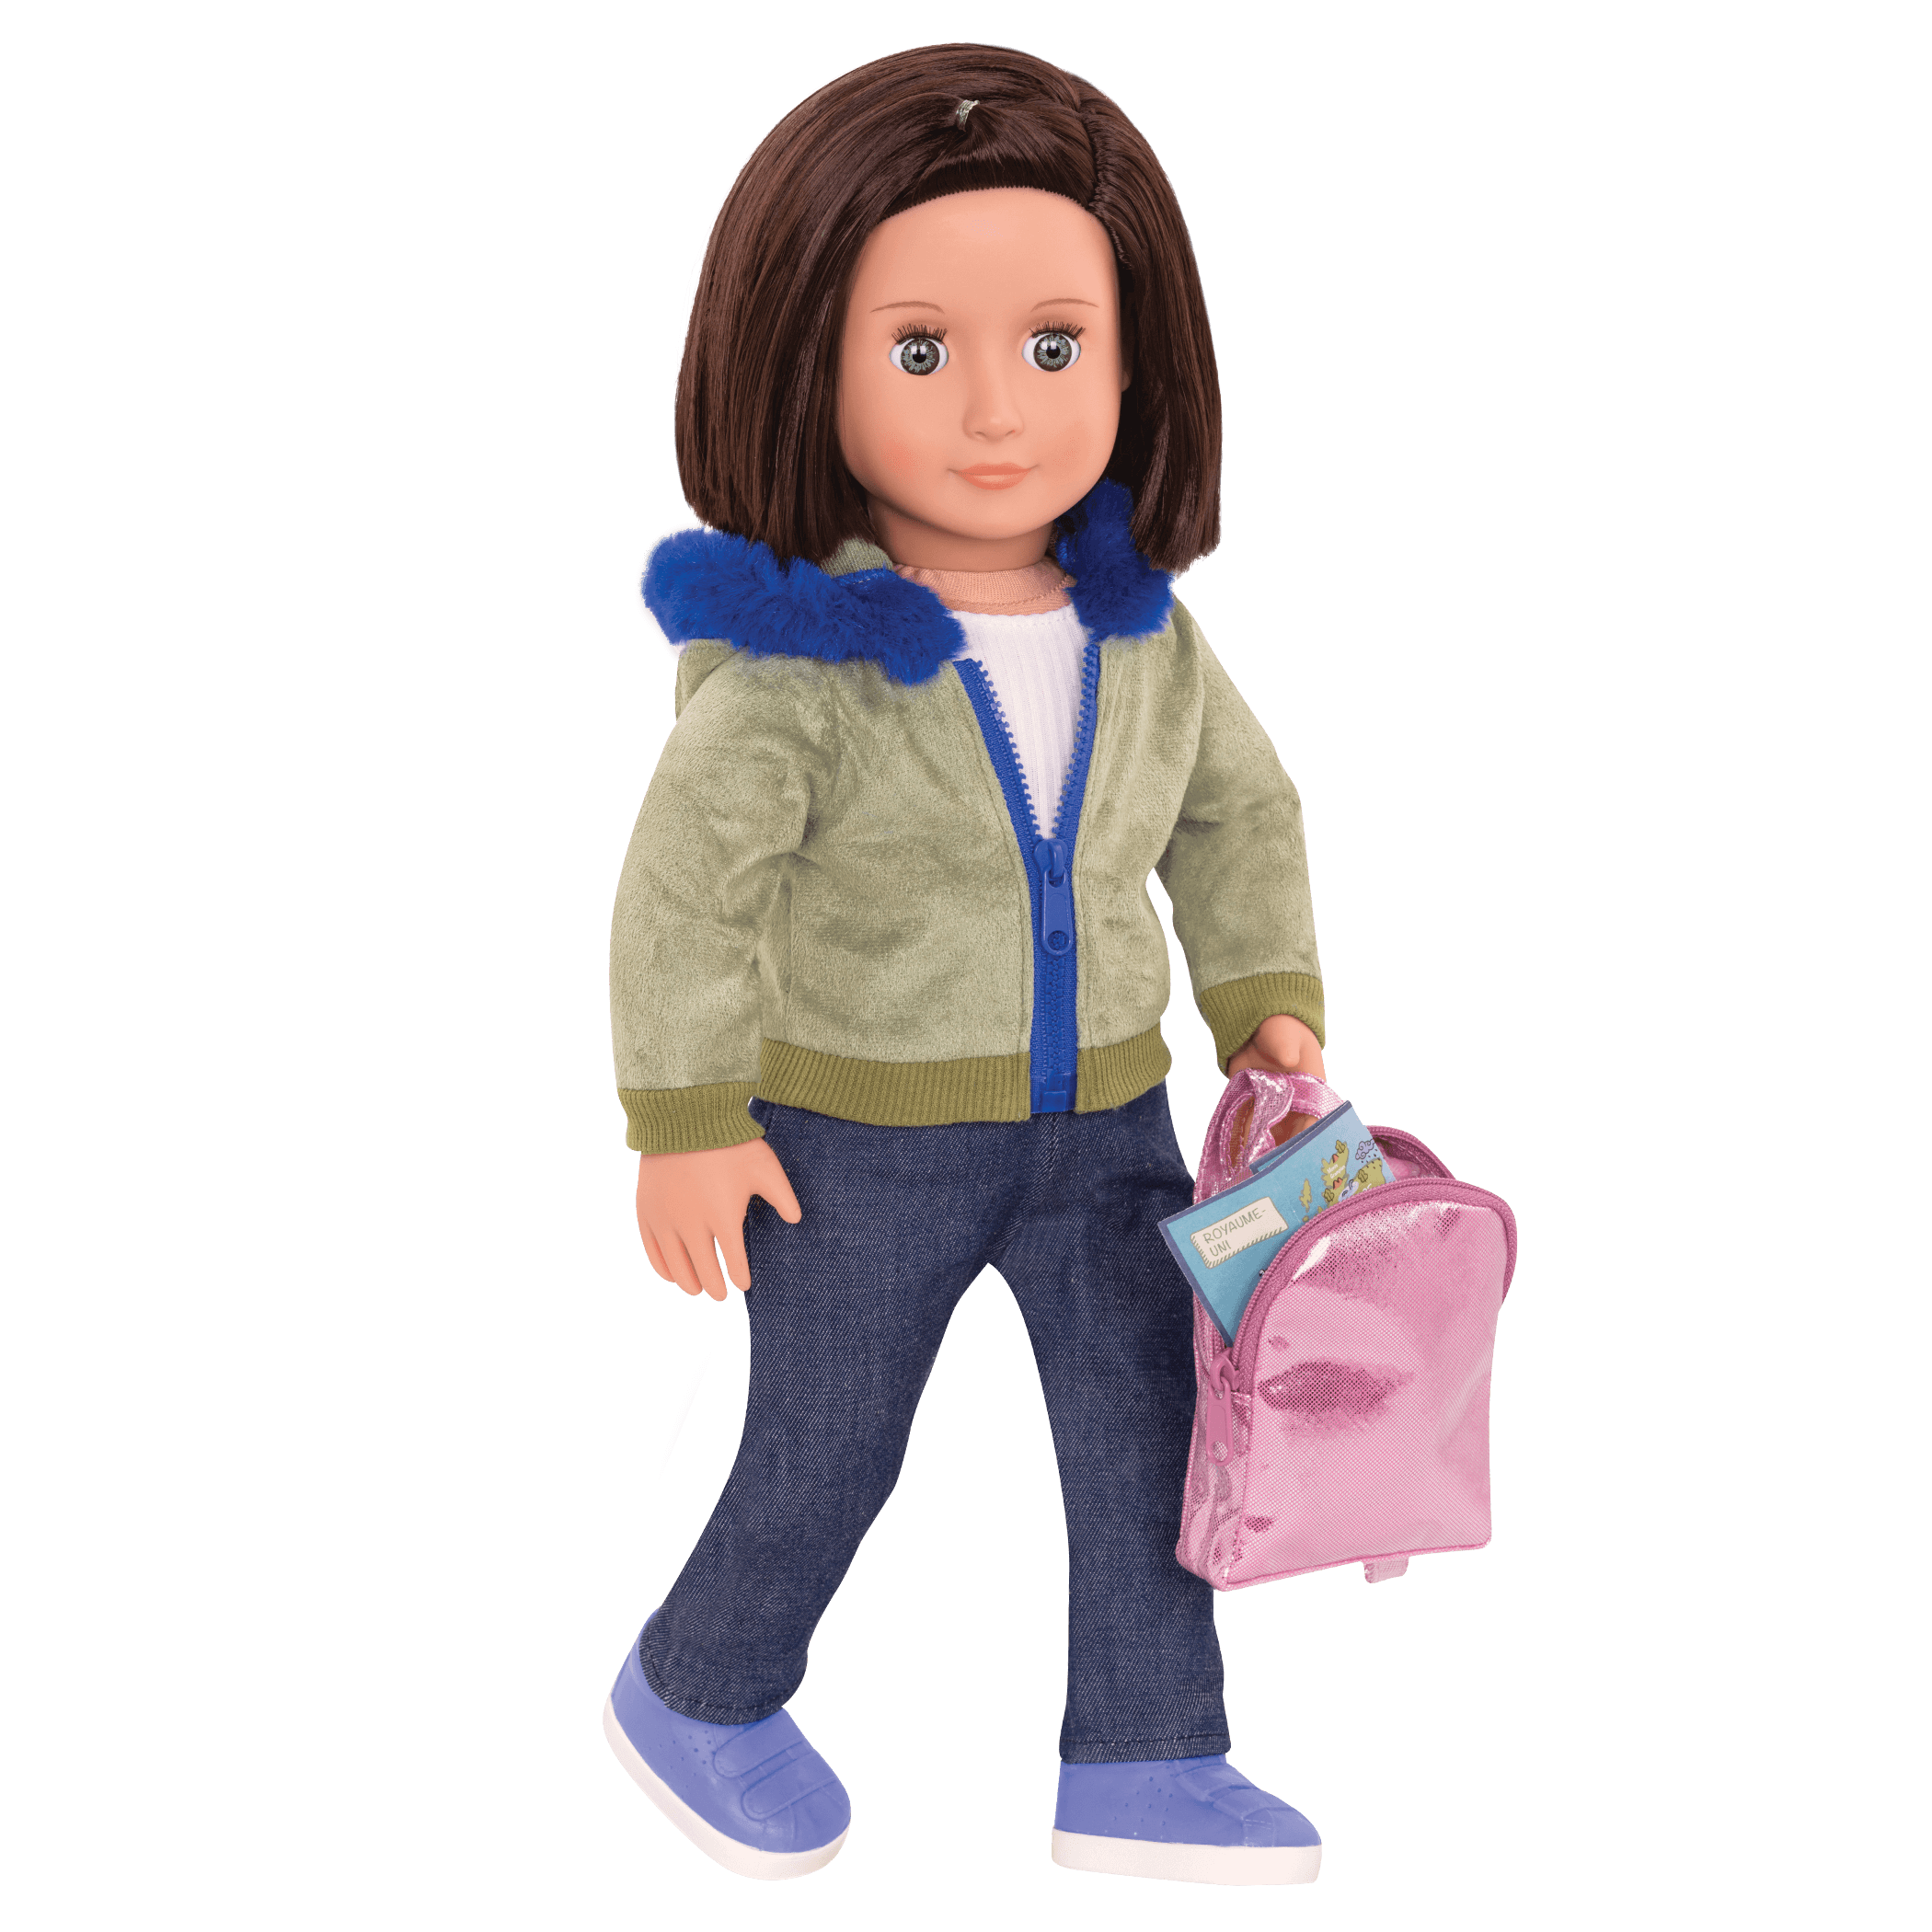 Our Generation Khaki Overalls Doll Outfit